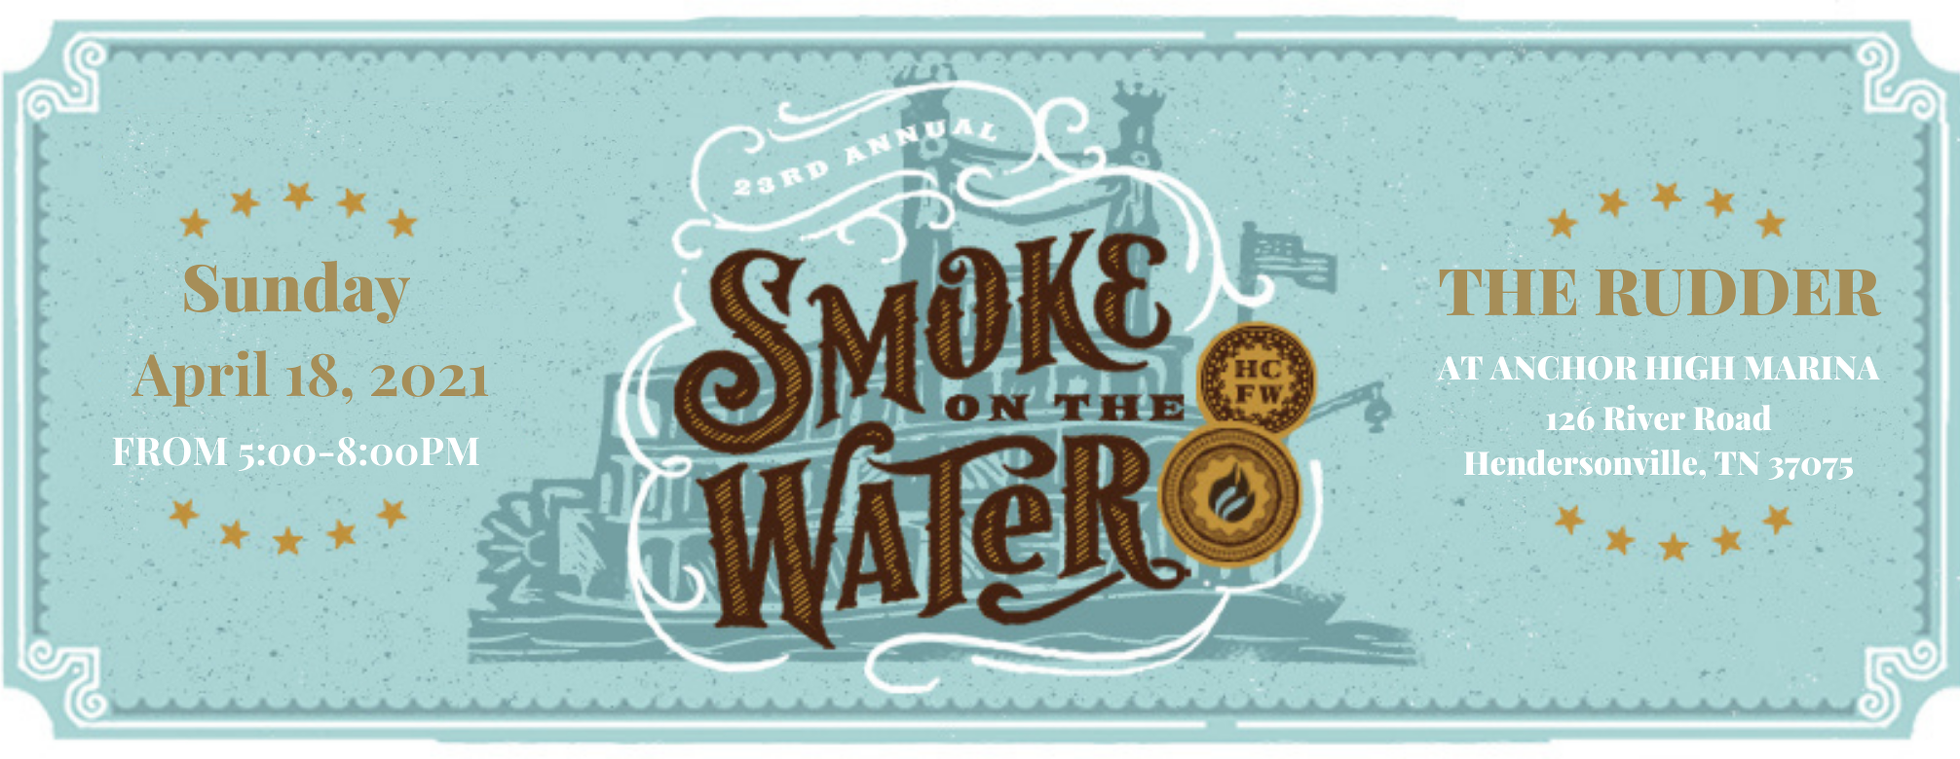 Smoke On The Water 2021